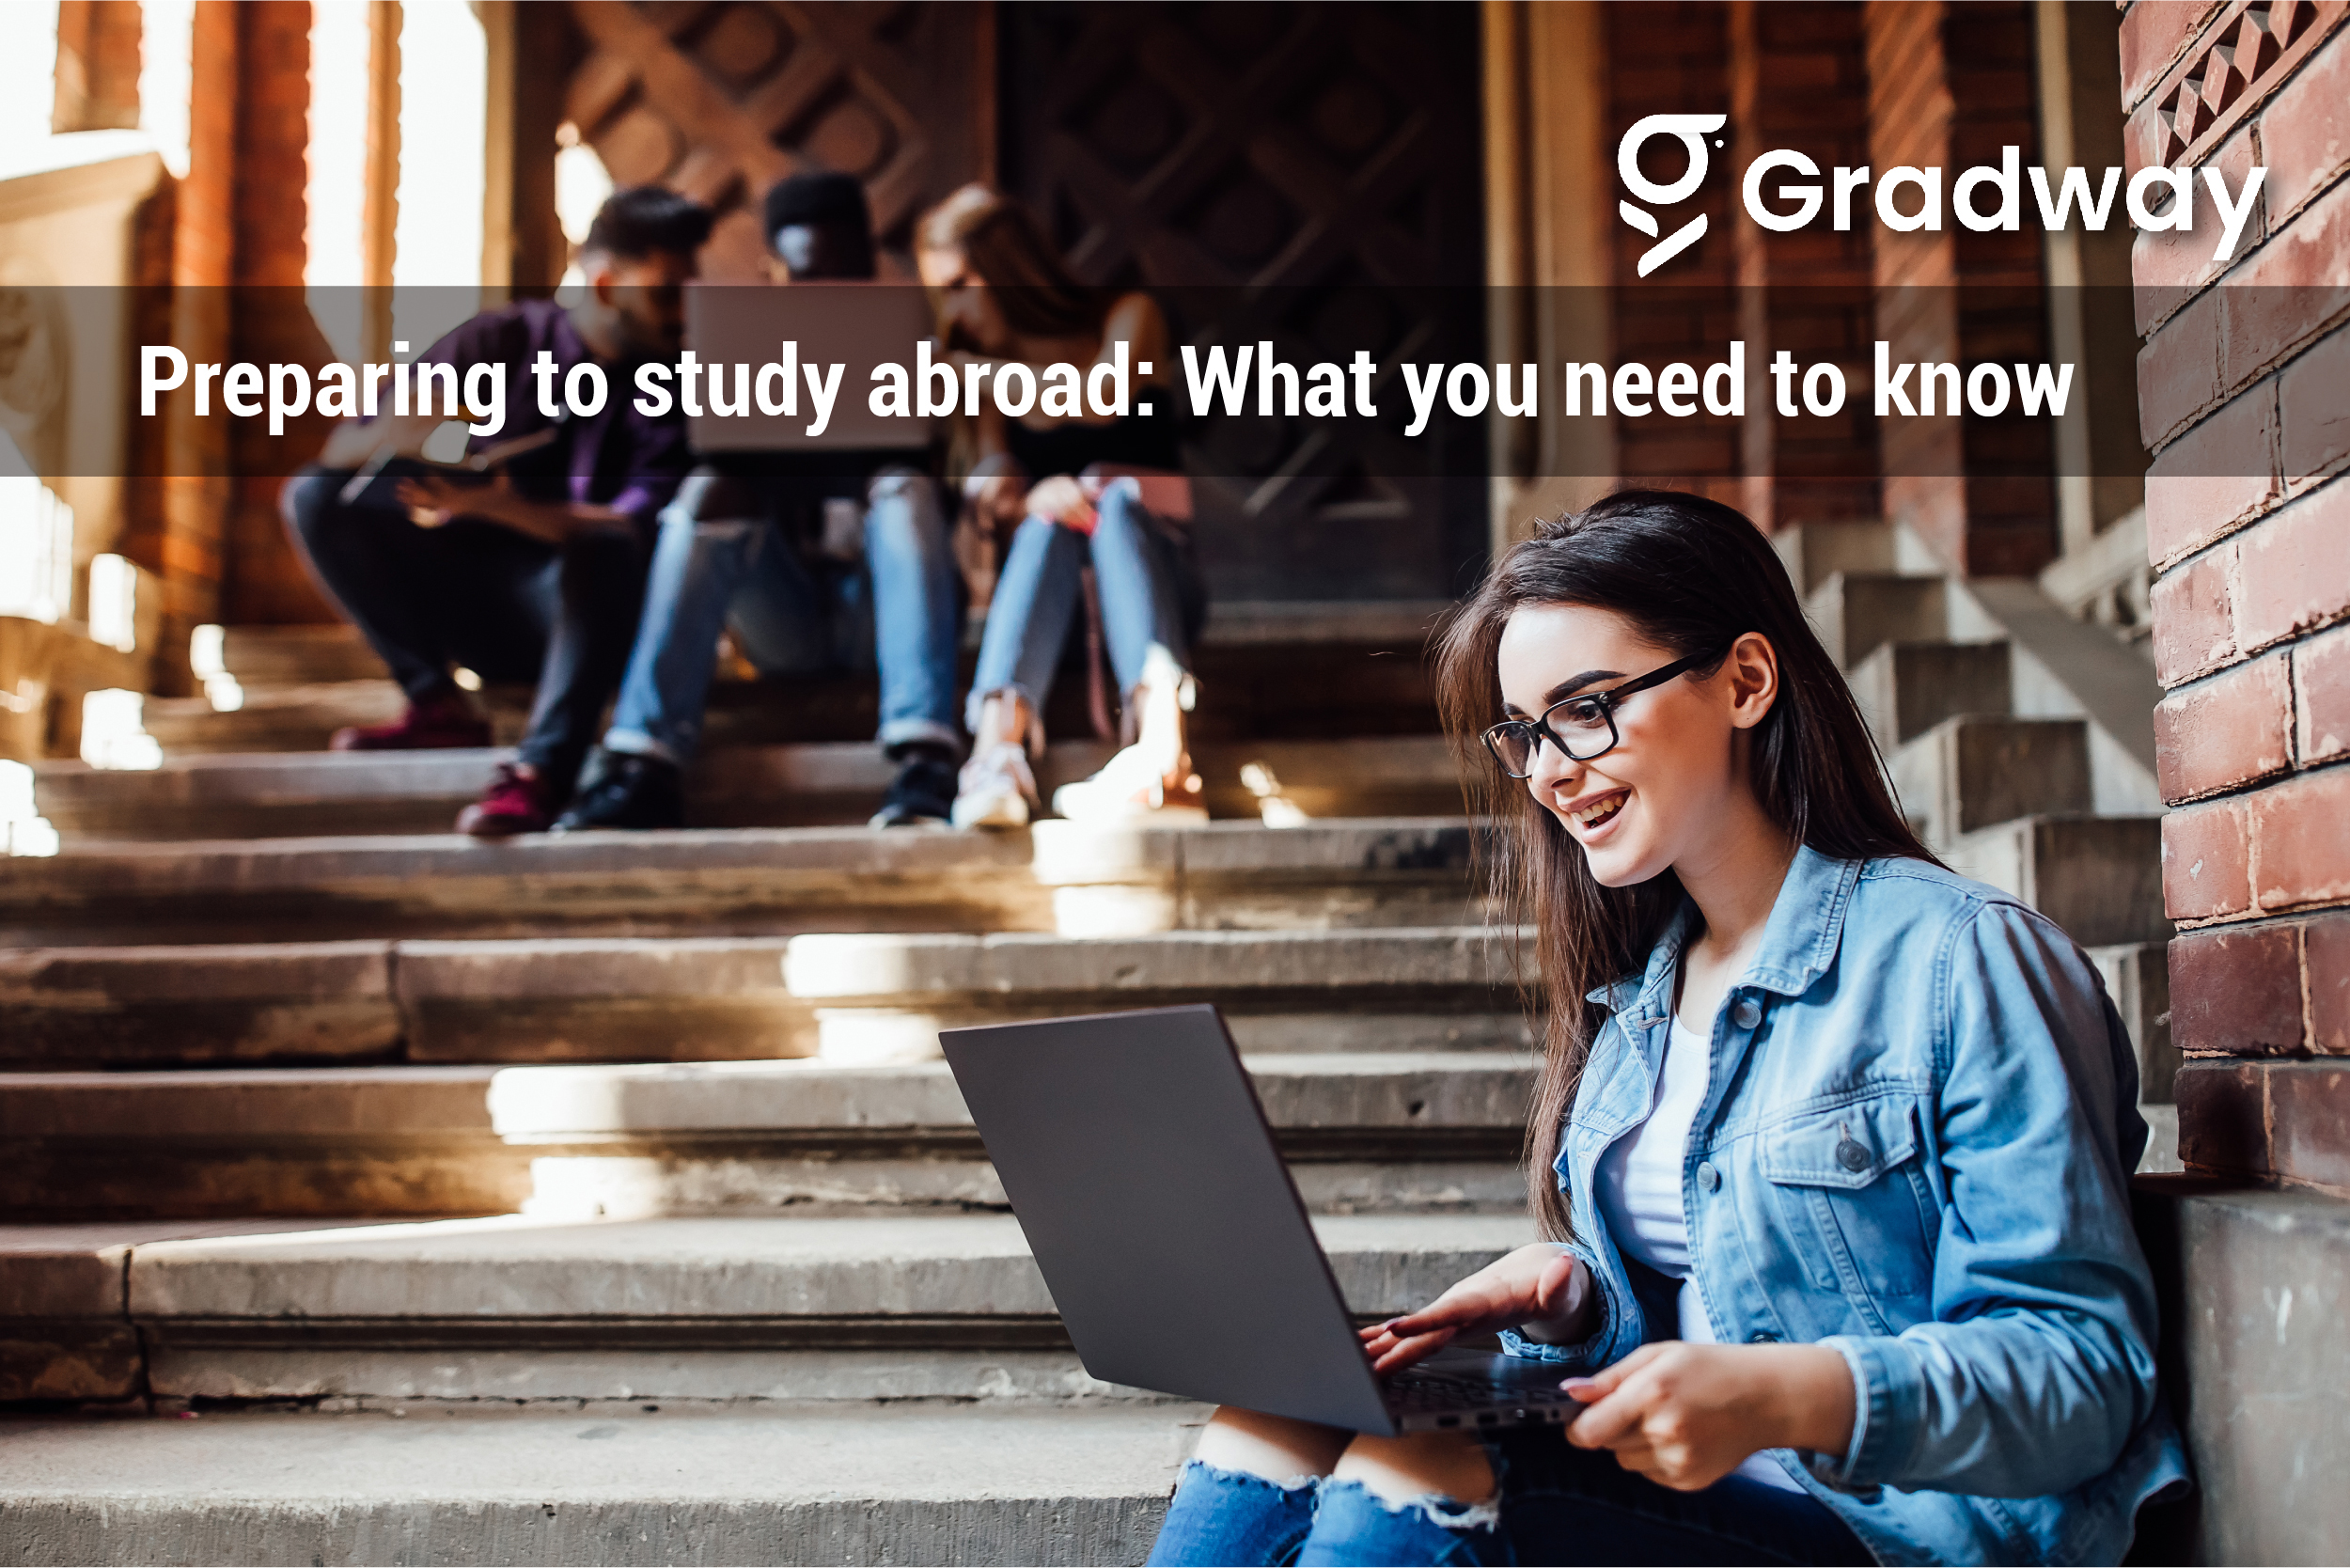 Preparing to Study Abroad: What You Need to Know | Gradway